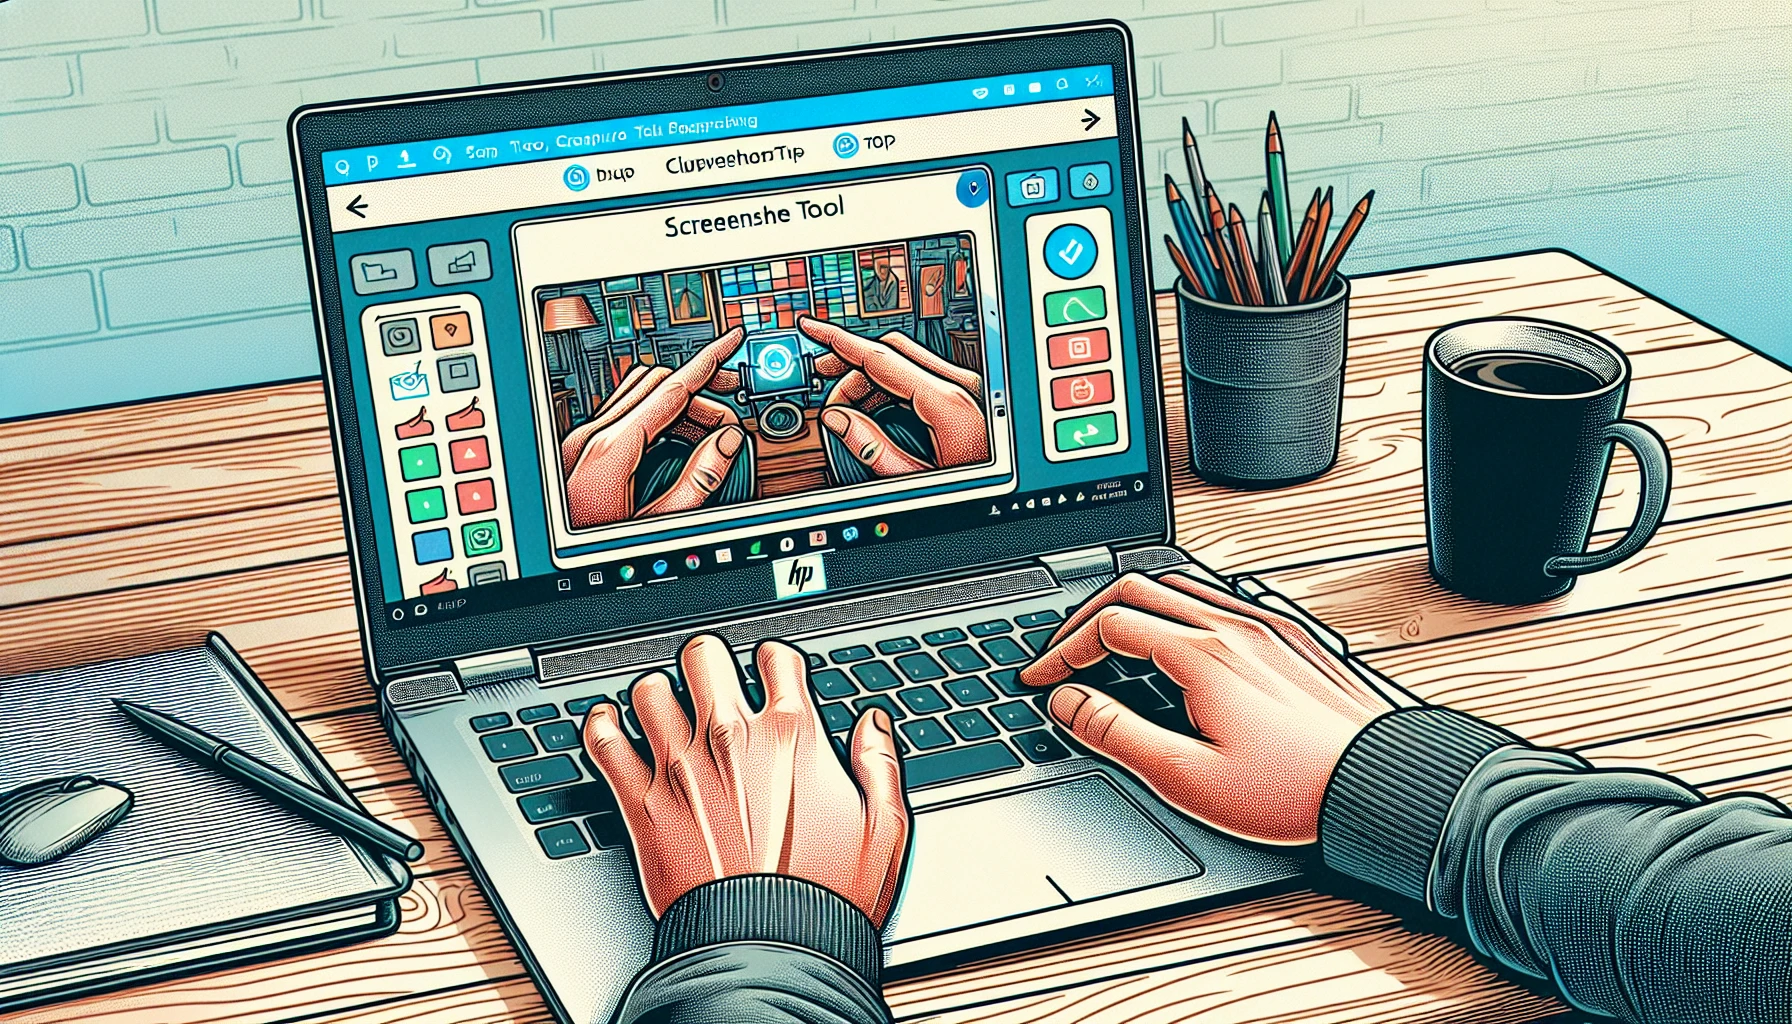 Illustration of a person using a third-party screenshot tool on an HP laptop